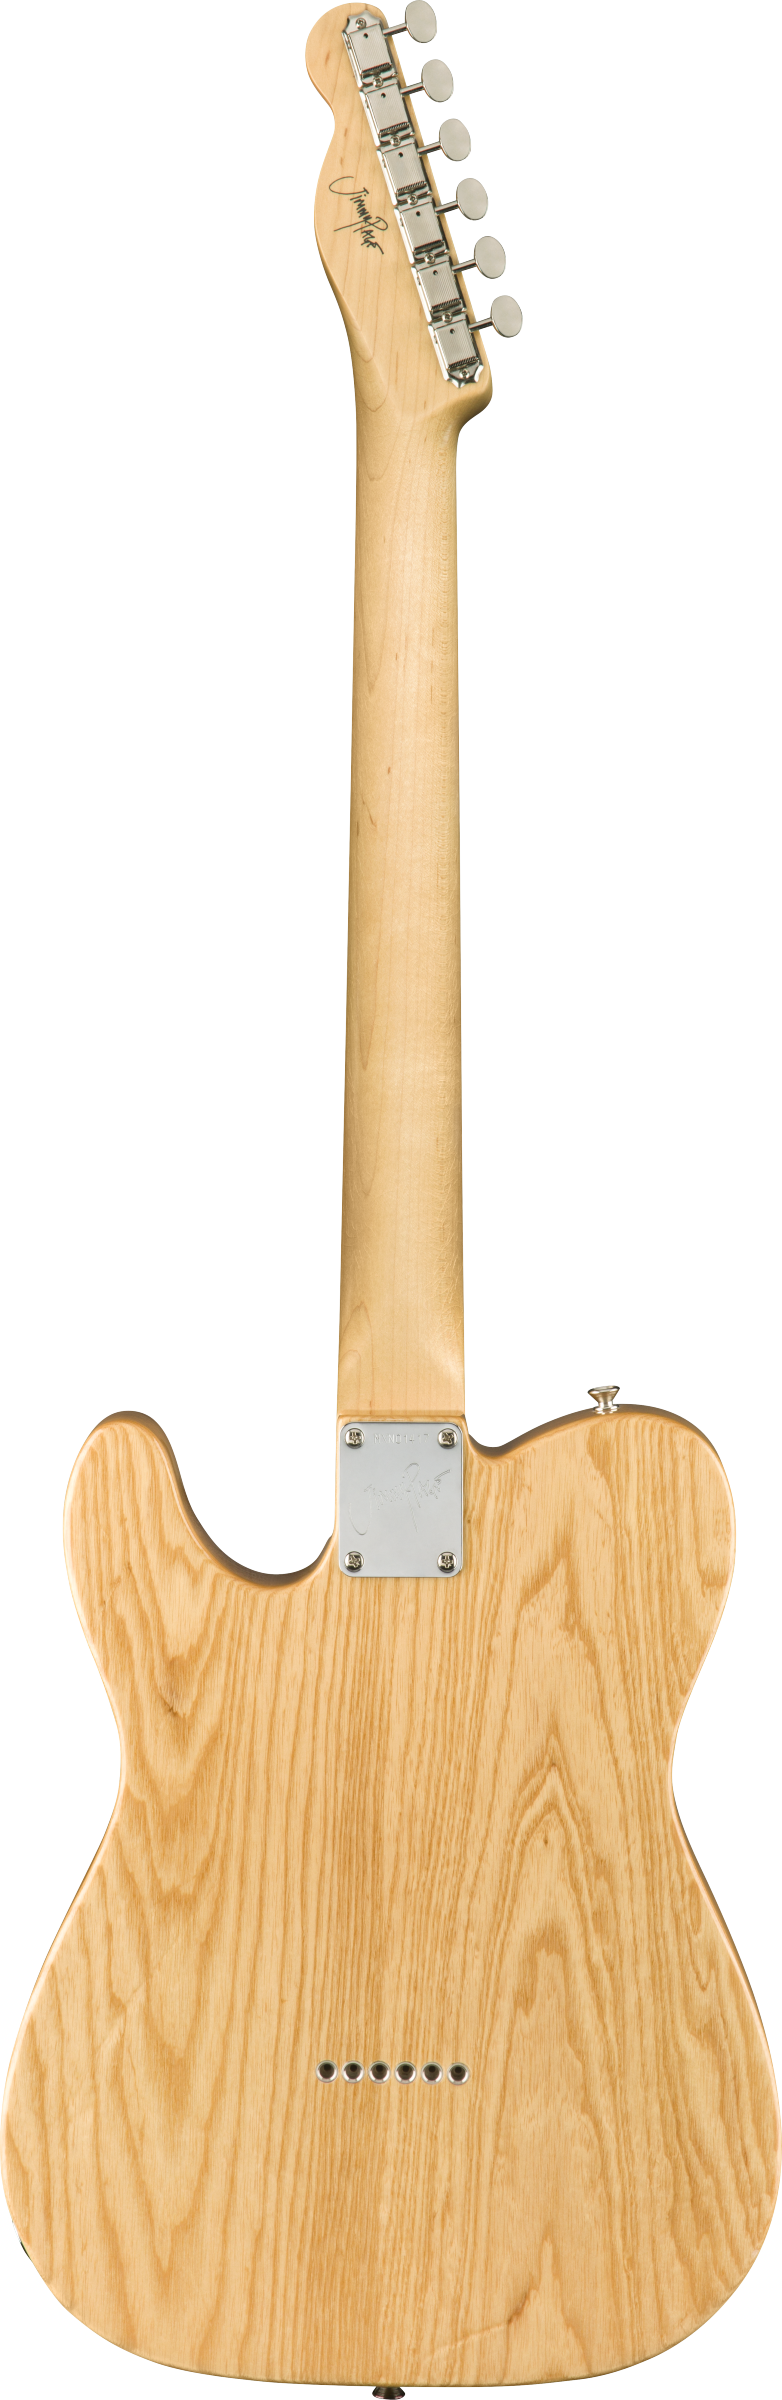 Back of Fender Jimmy Page Telecaster "Dragon" RW Natural.